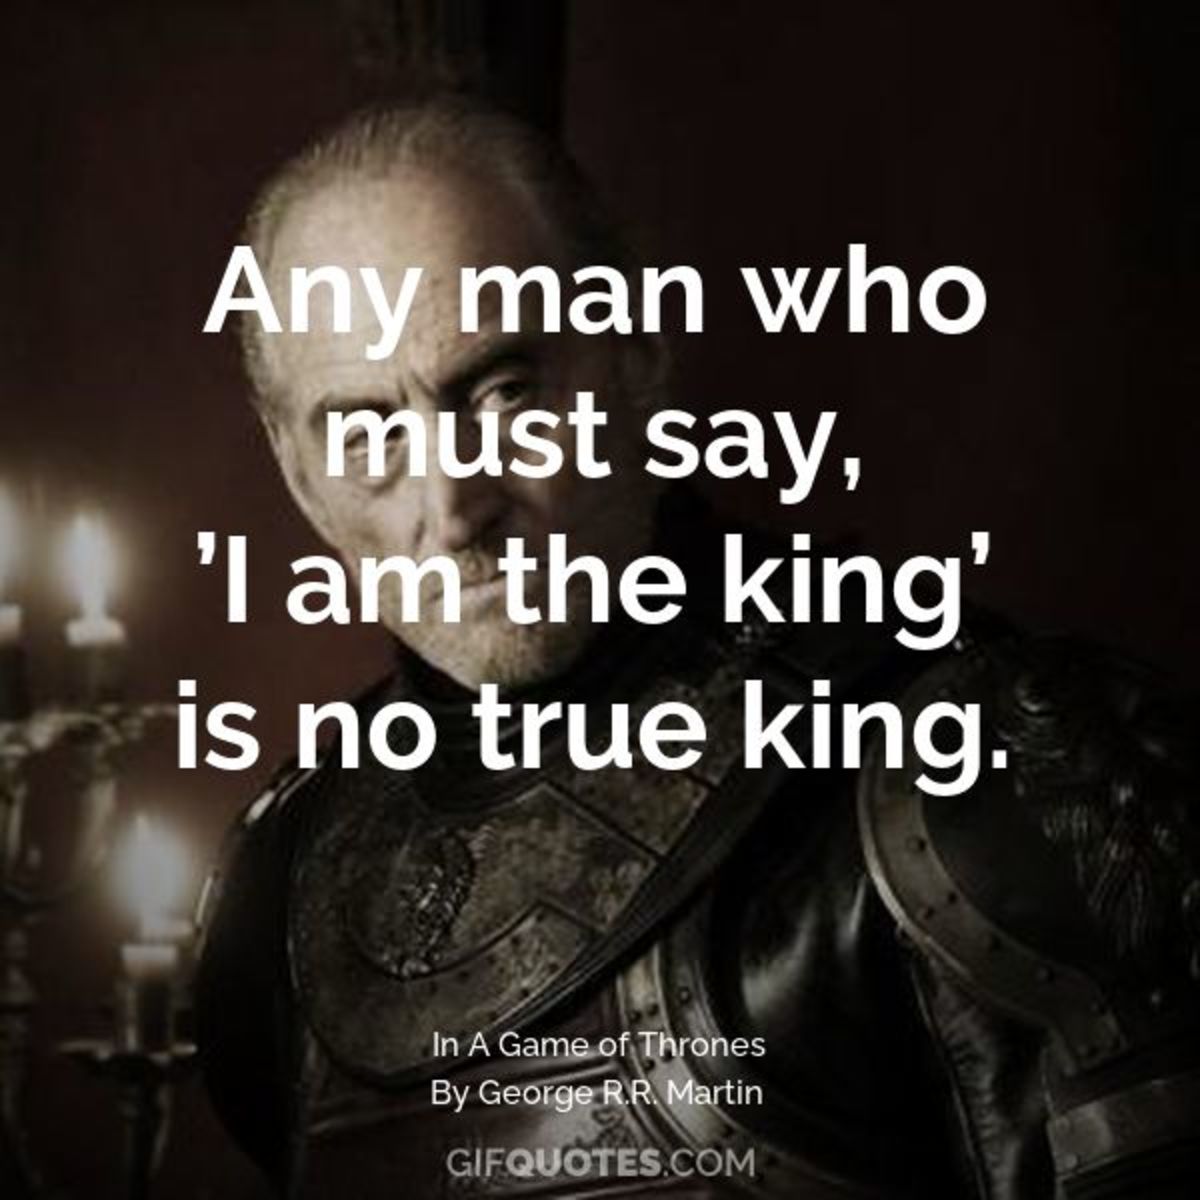 Meme about kingship taken from Game of Thrones, posted on gifquotes.com